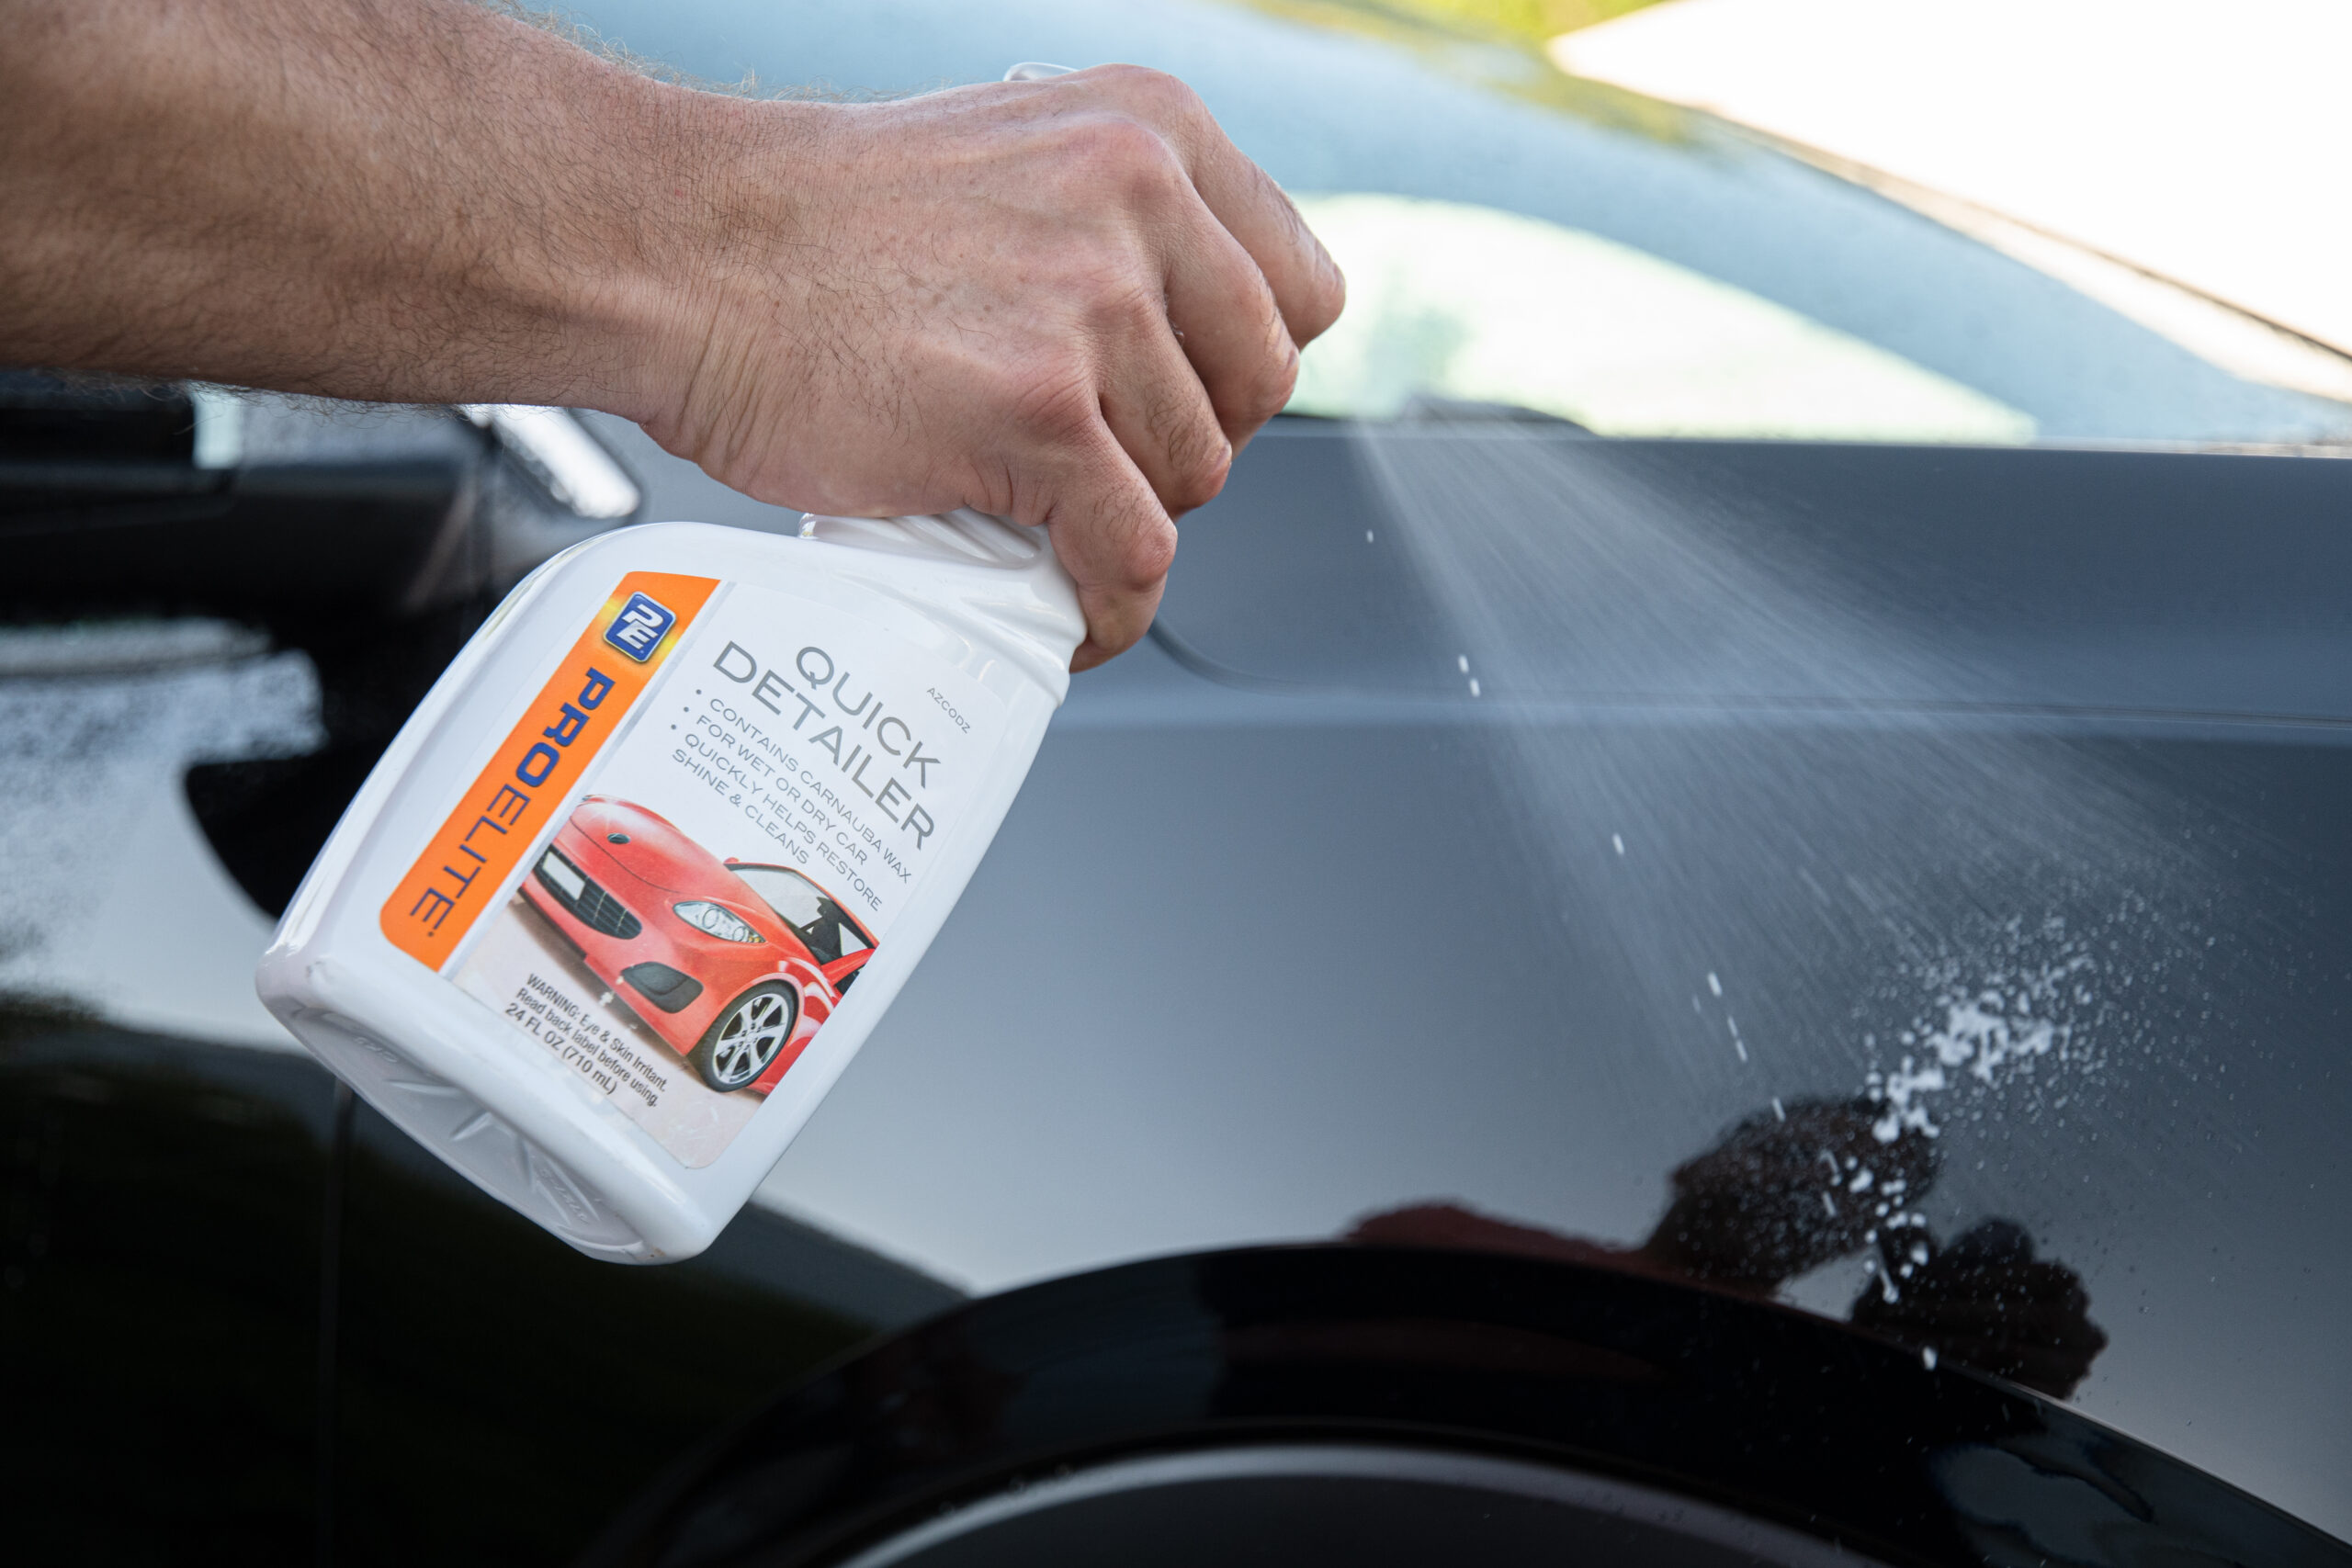 How to Wash a Car - Waxing, Glass Cleaning Tips, & More